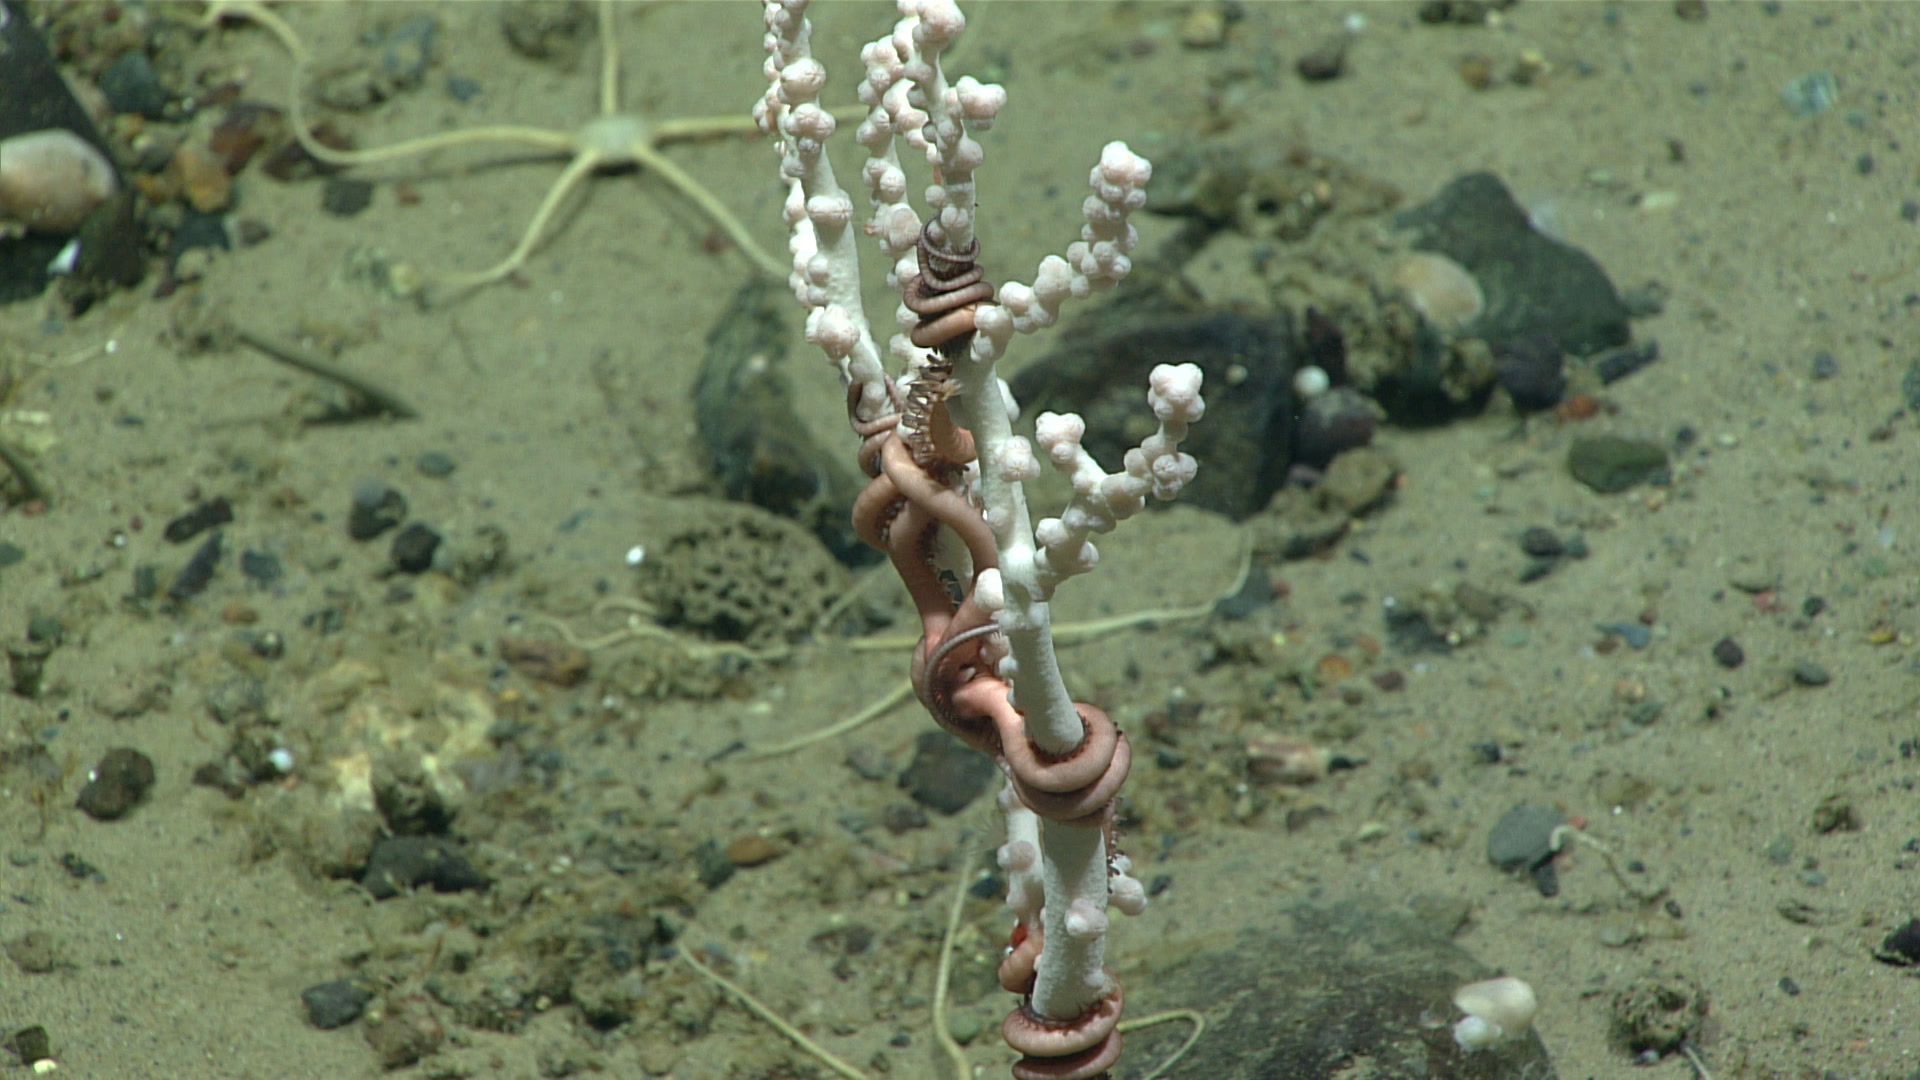 A snake star, Astrobrachion constrictum, coiled around a branch of bubblegum coral, Paragorgia arborea, in the Fundian Channel.